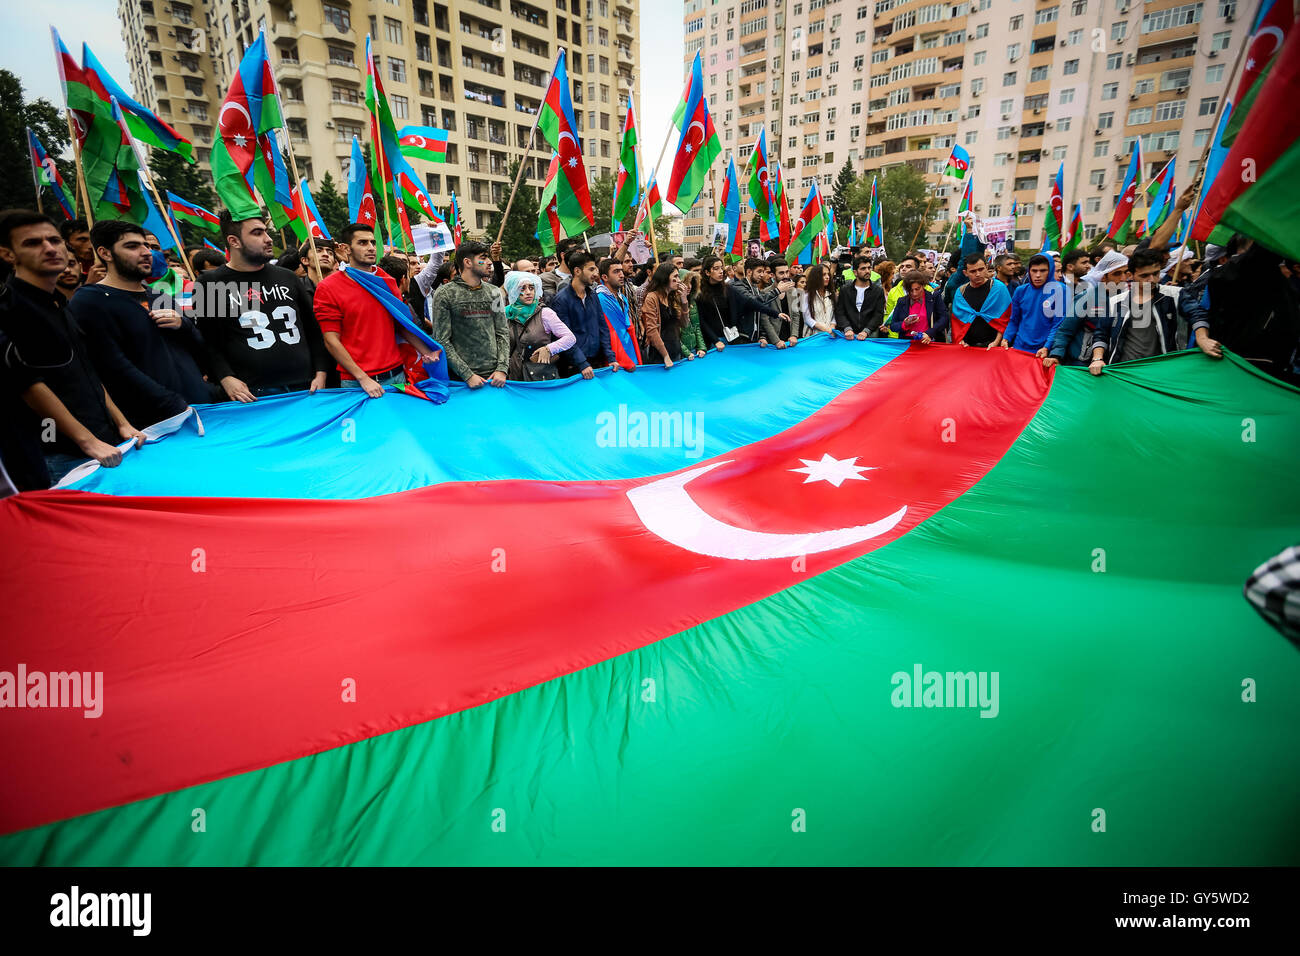 Baku, Azerbaijan. 17th Sep, 2016. Azerbaijani opposition supporter holds a big Azerbaijan flag during the rally in Baky at Mahsul stadium. Today hundreds of anti government protesters are holding a rally ahead of a key referendum. The protesters are demonstrating against a September 26 referendum scheduled in the tightly controlled South Caucasus country that is expected to strengthen the authority of President Ilham Aliyev, extend the length of presidential terms, and drop the minimum age for future presidential candidates. Credit:  Aziz Karimov/Pacific Press/Alamy Live News Stock Photo